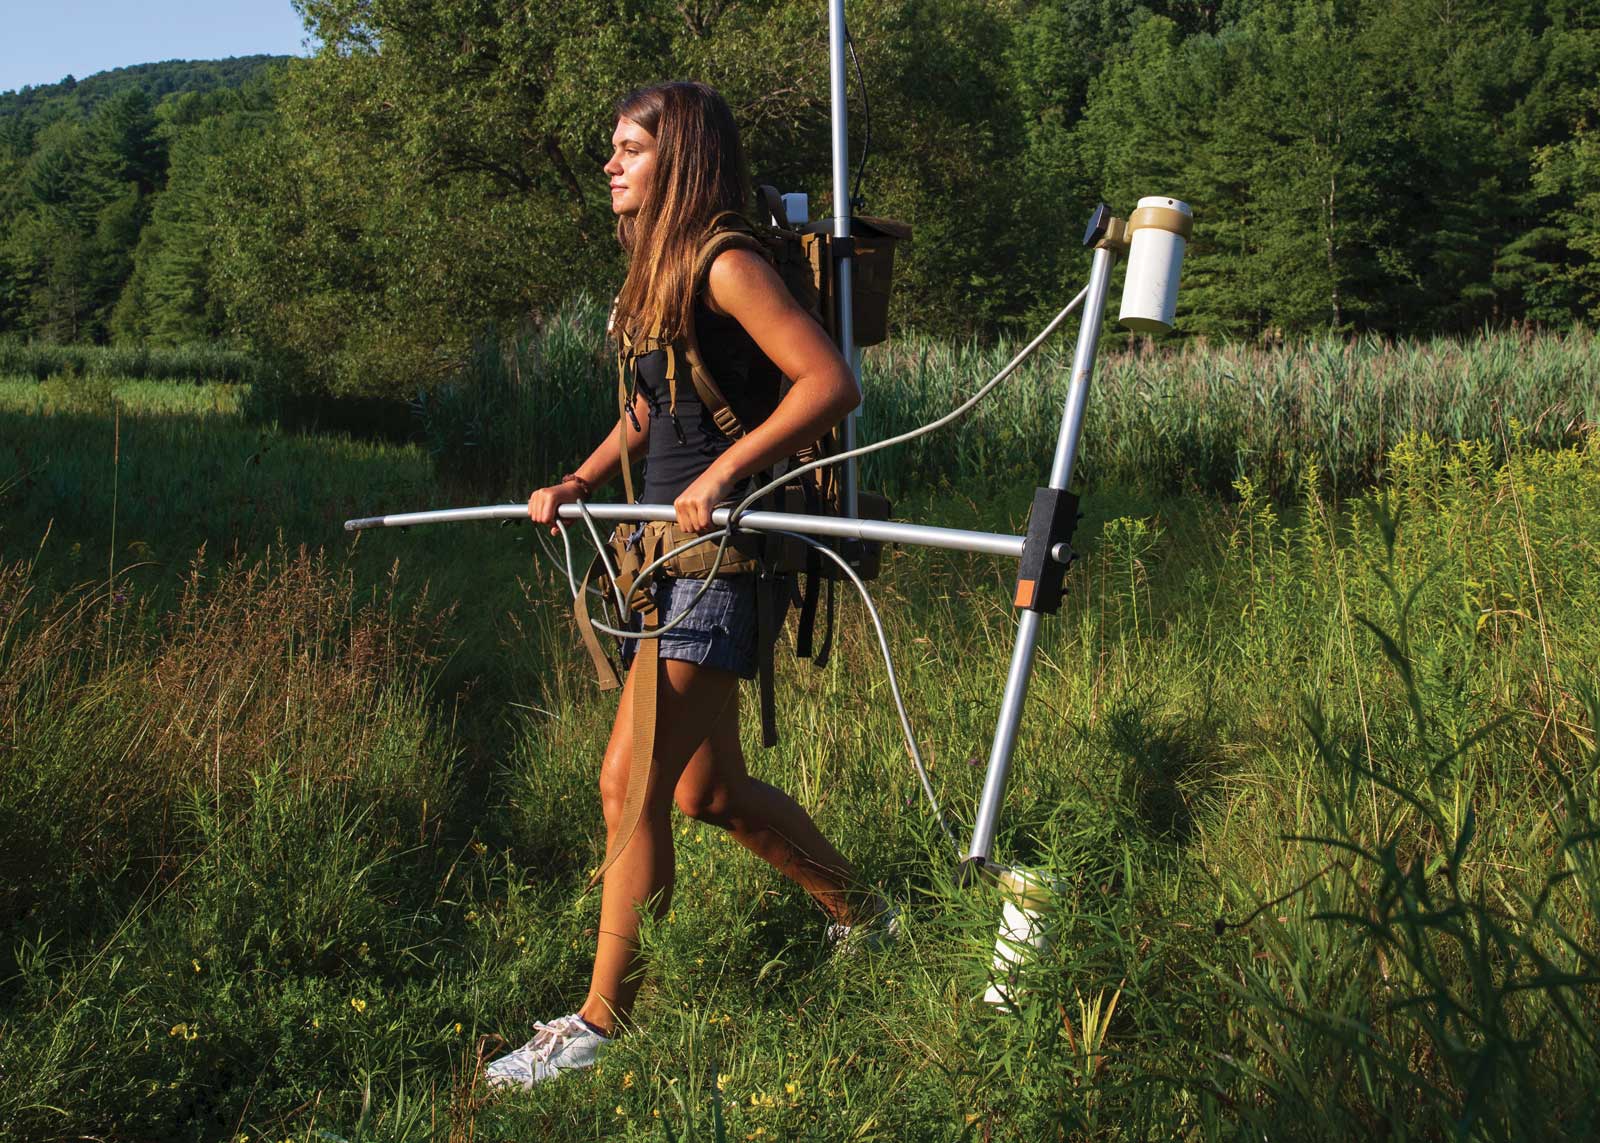 Natalia Romanzo, a master’s student in sustainable communities, is wearing about 40 pounds of equipment, including a magnetometer and a battery pack. The equipment is still being used, but drones are increasingly providing a more practical alternative.